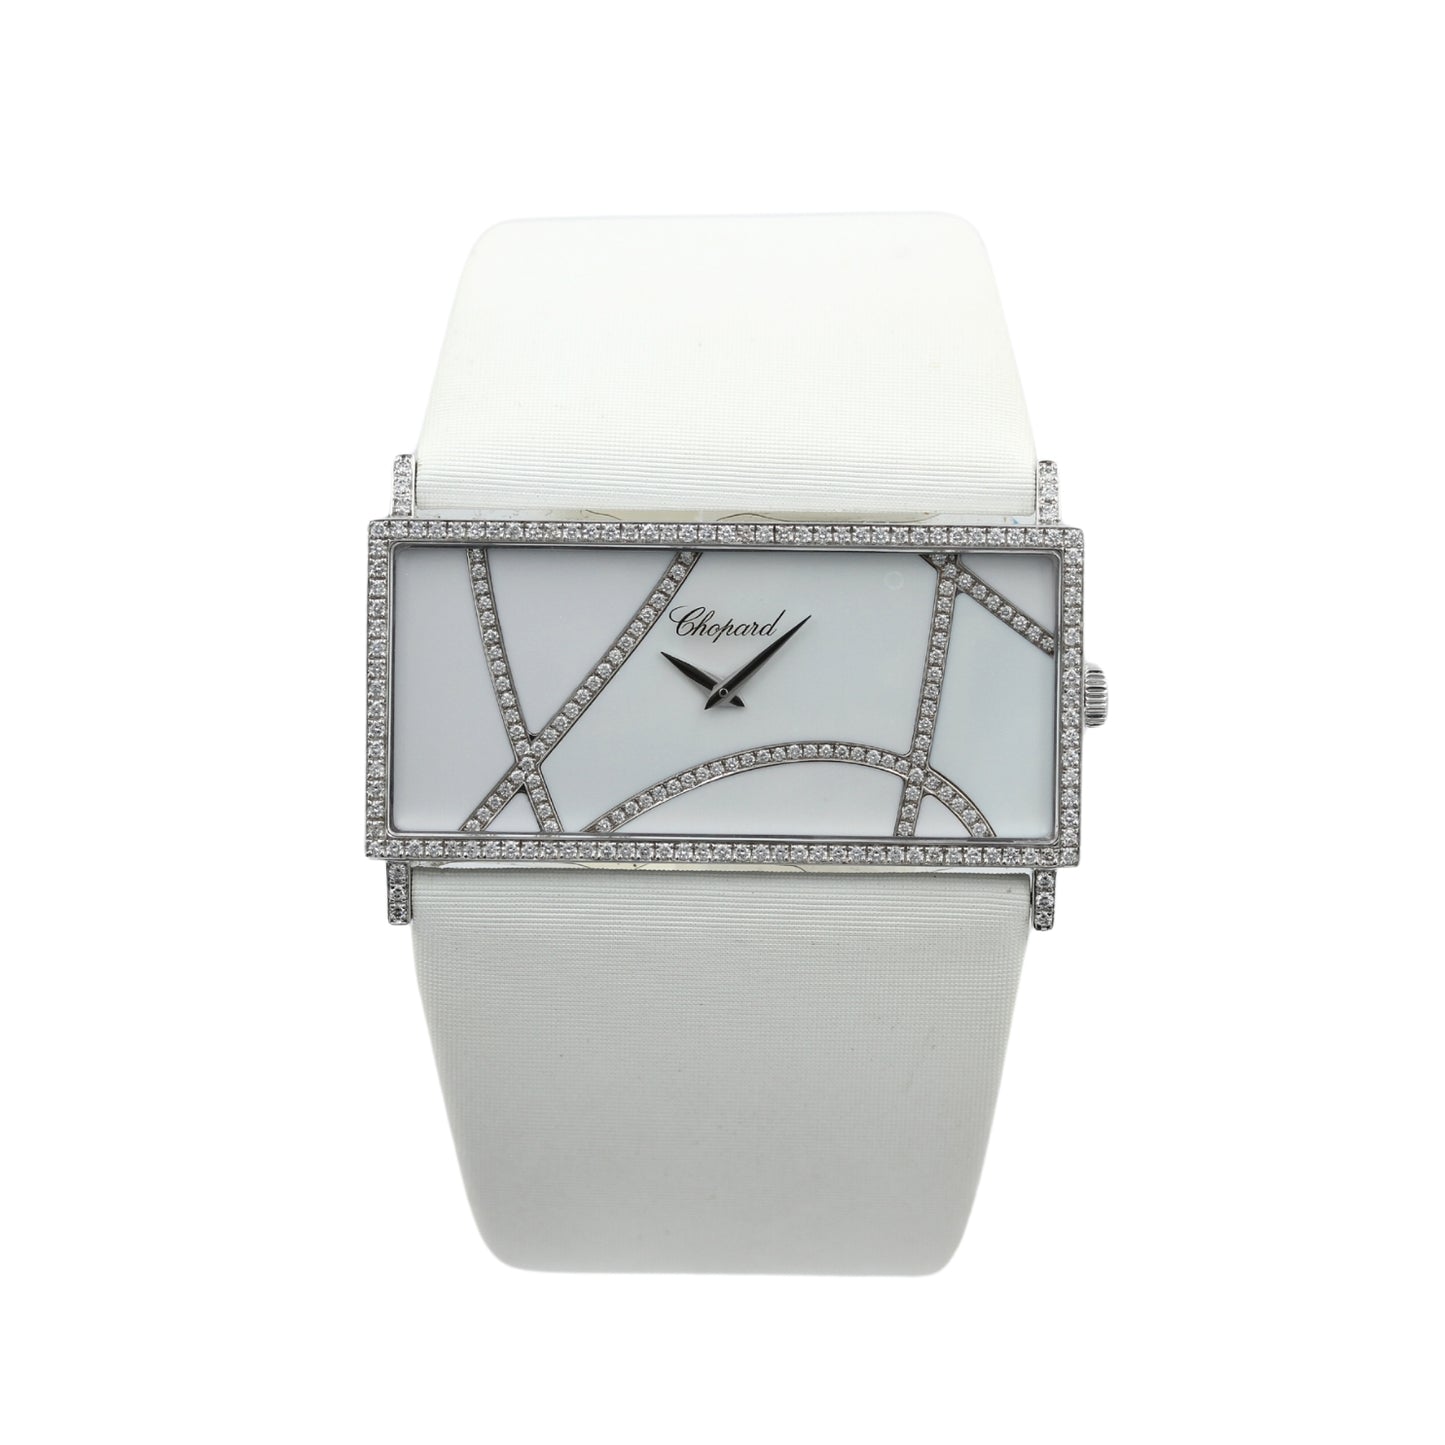 Chopard LA STRADA mother of pearl dial set with diamonds 242 = approx. 5.30ct, 416867-1001